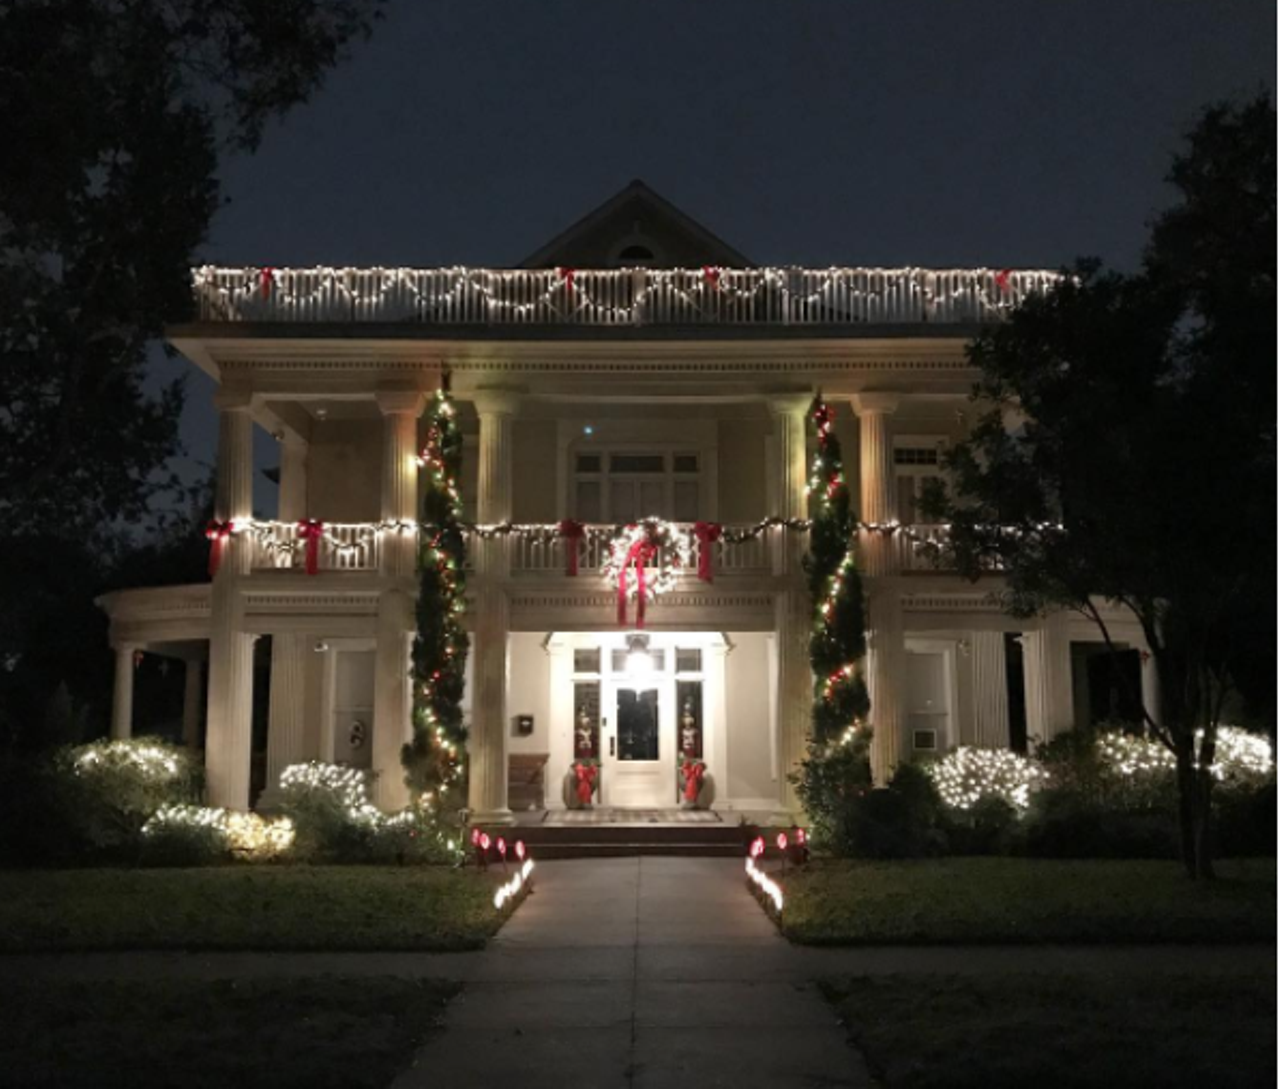 Monte Vista
Christmas lights just look better when they’re carefully placed on beautiful homes. Take a drive through the neighborhood and admire these homes that fit the season just right.
Photo via Instagram /  sun_carlos